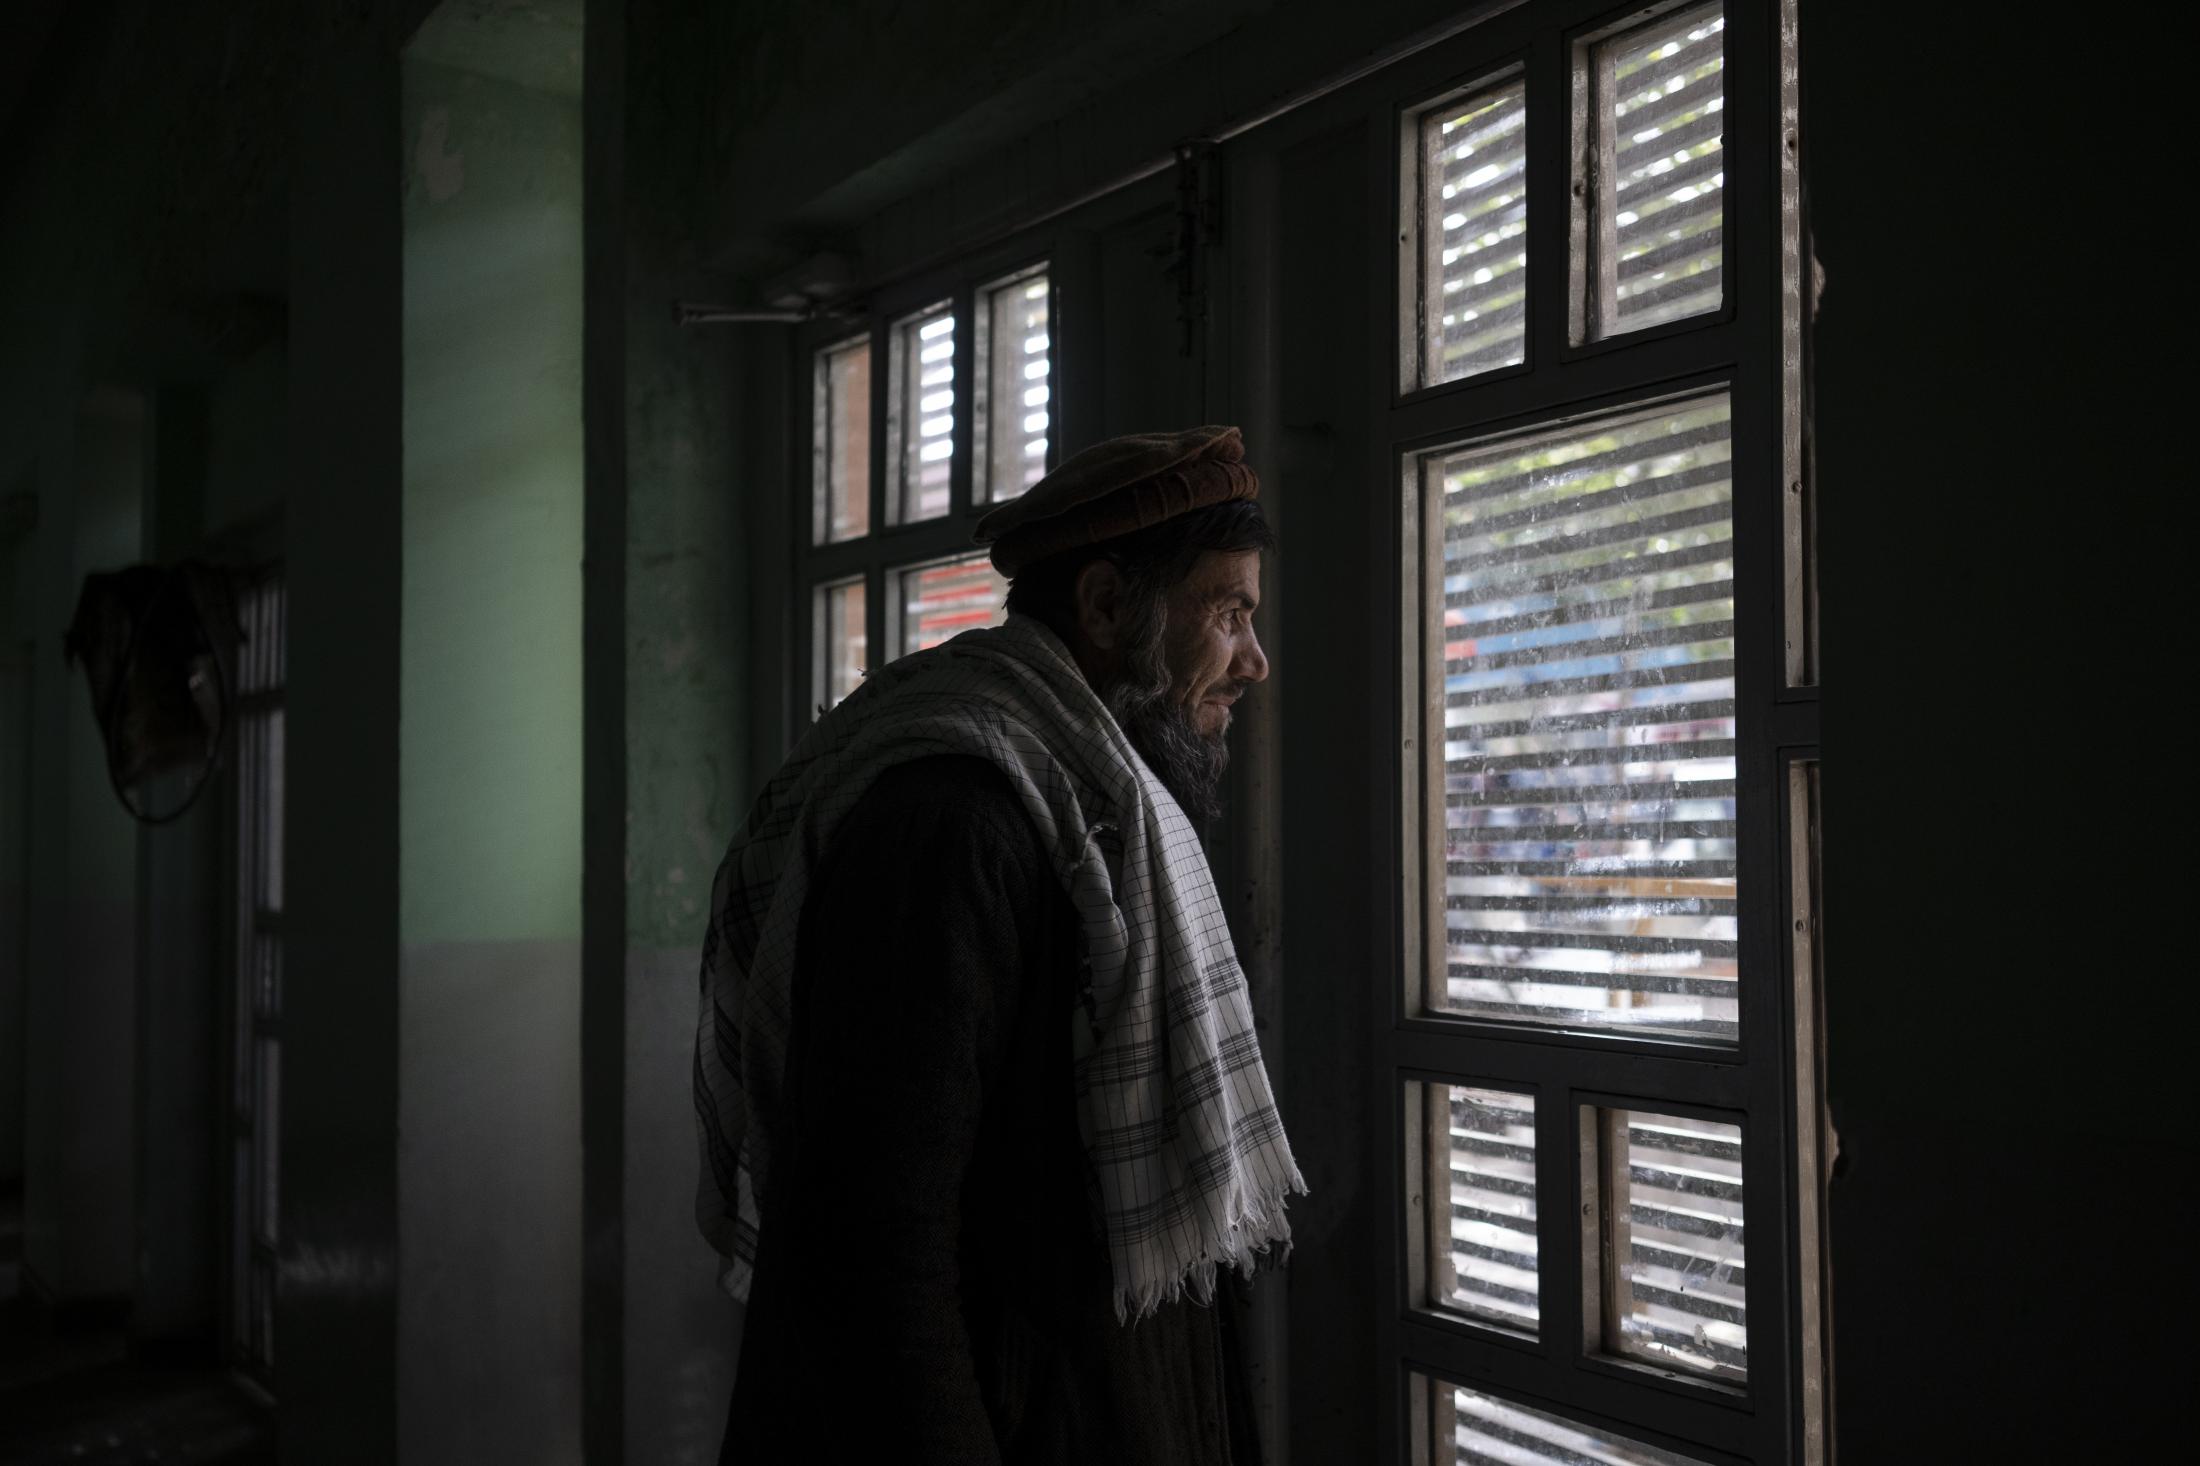 The Cinema of Kabul - Abdul Fatah looks out the window from the Ariana Cinema...